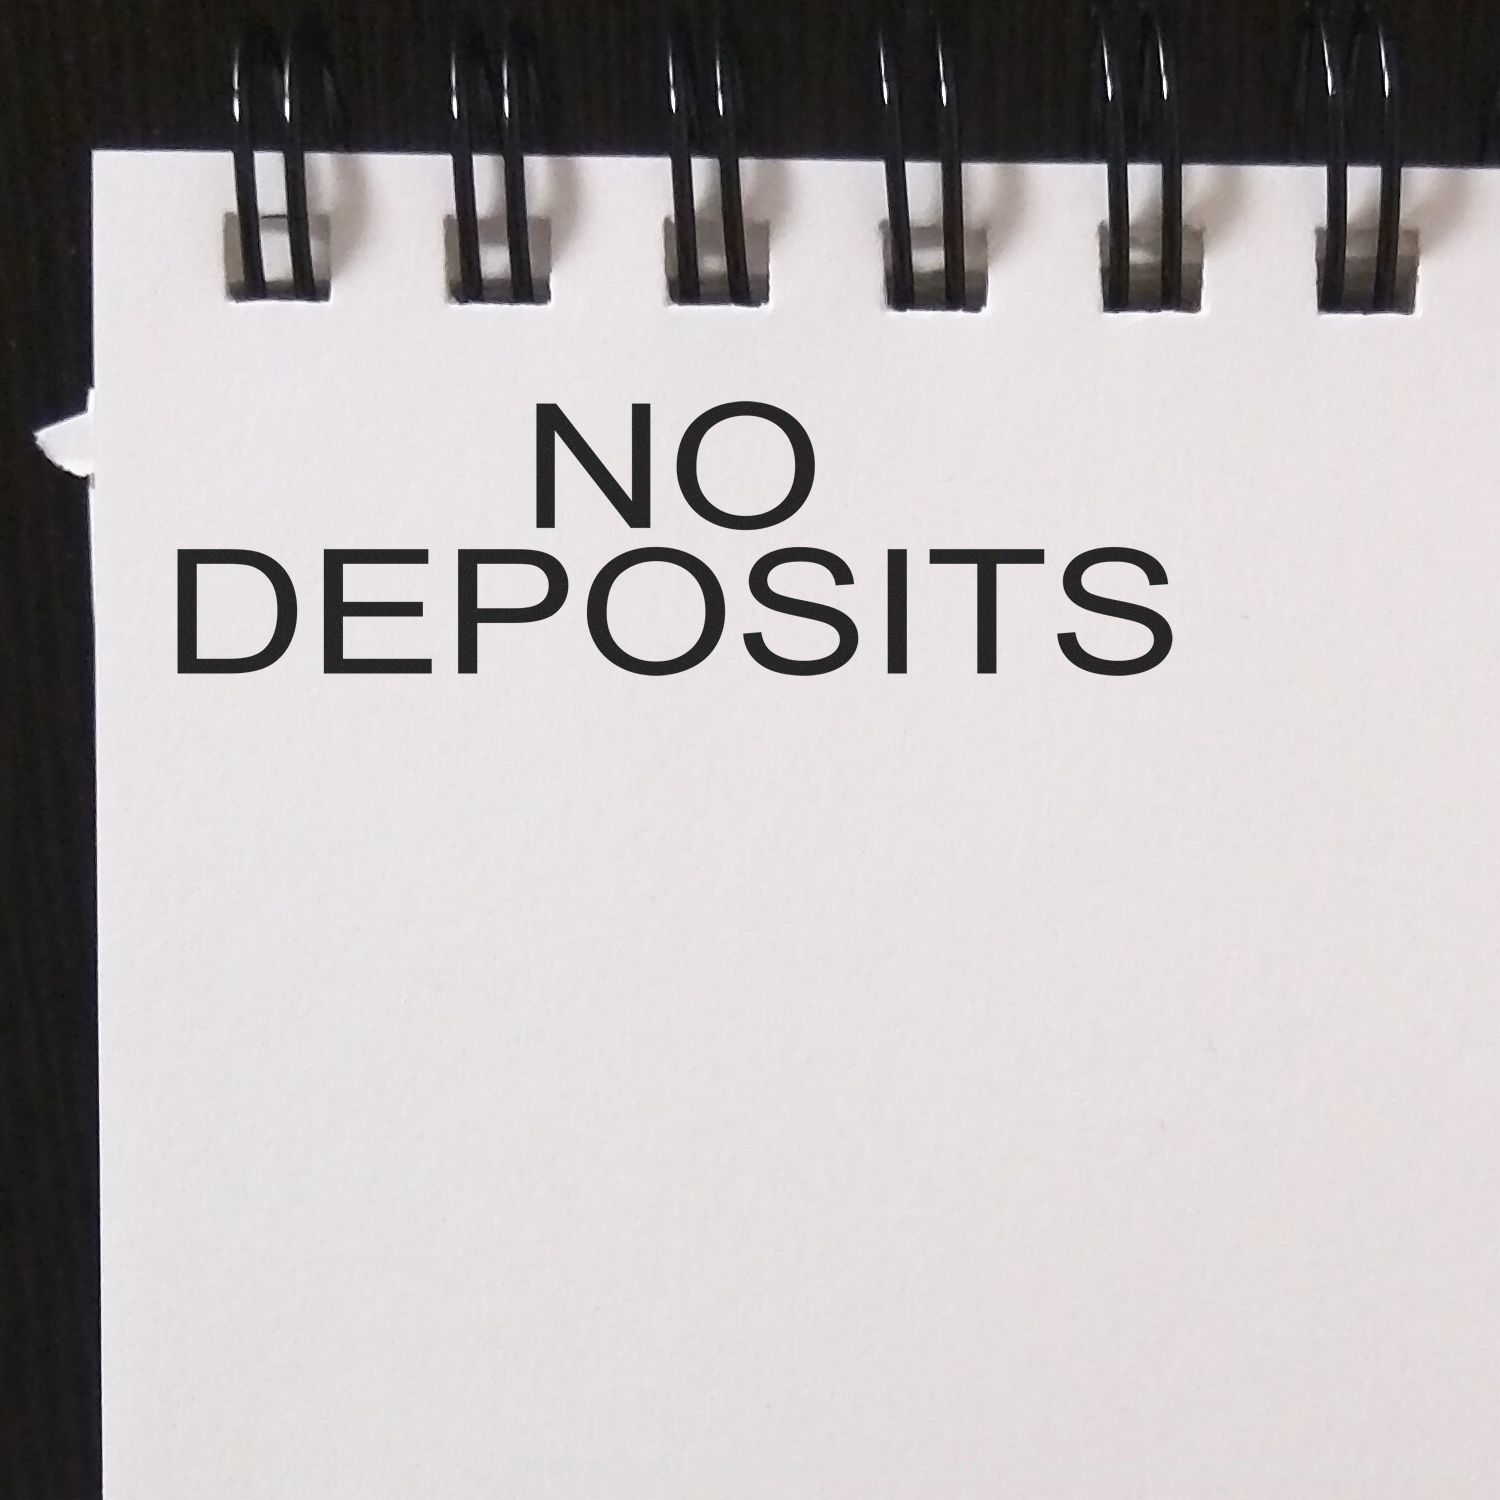 A self-inking stamp with a stamped image showing how the text "NO DEPOSITS" is displayed after stamping.